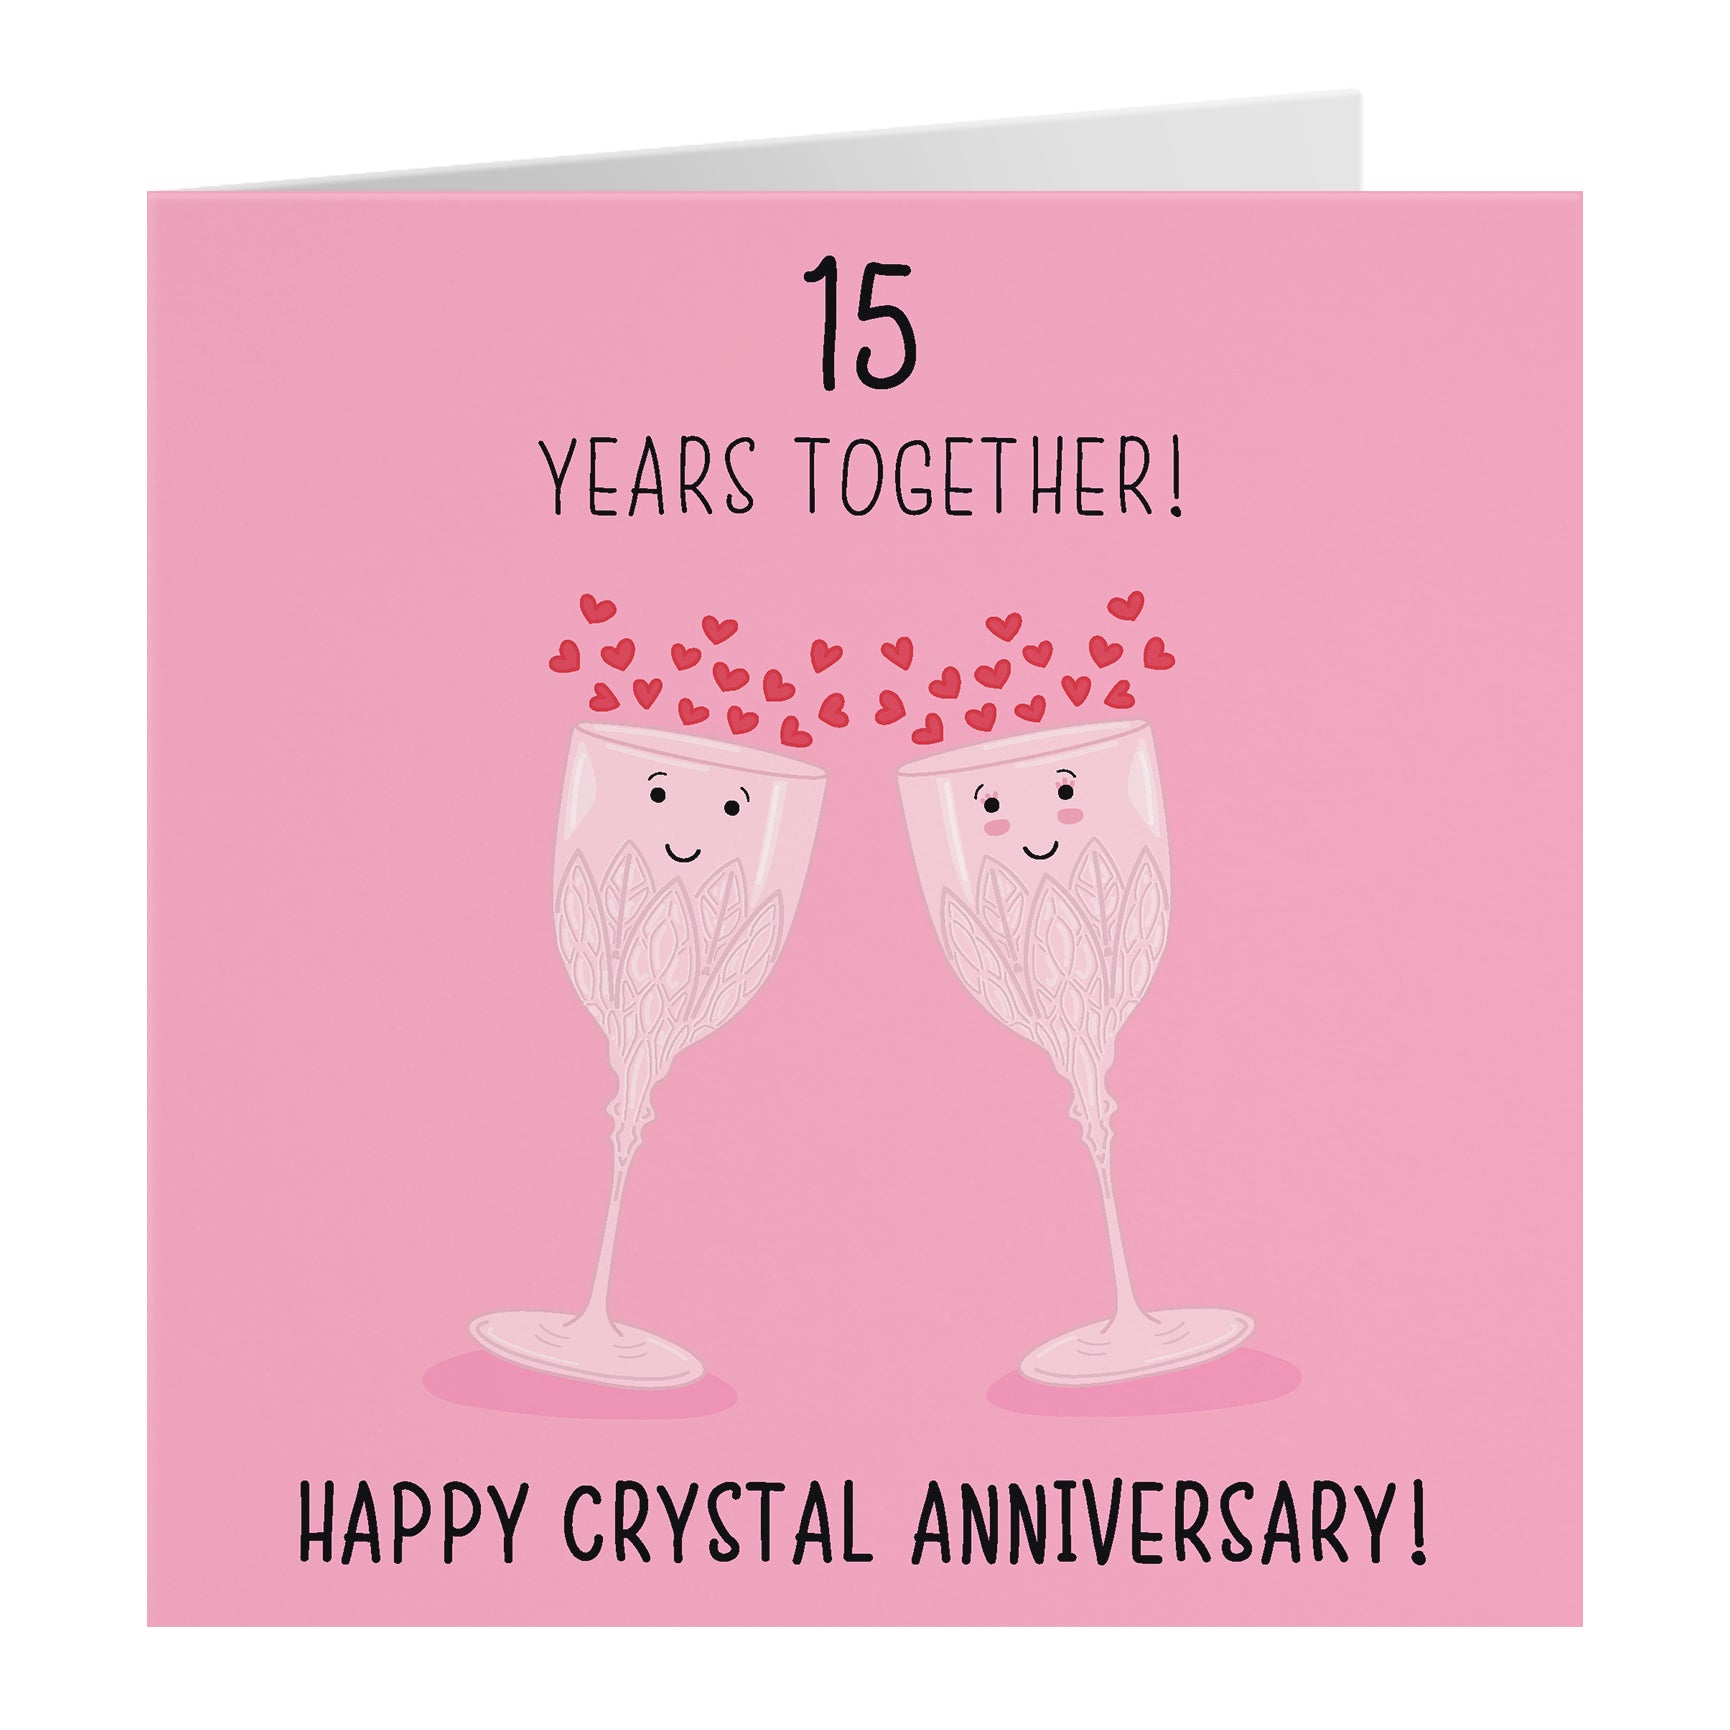 15th Anniversary Cards - Crystal Anniversary - 15 Years